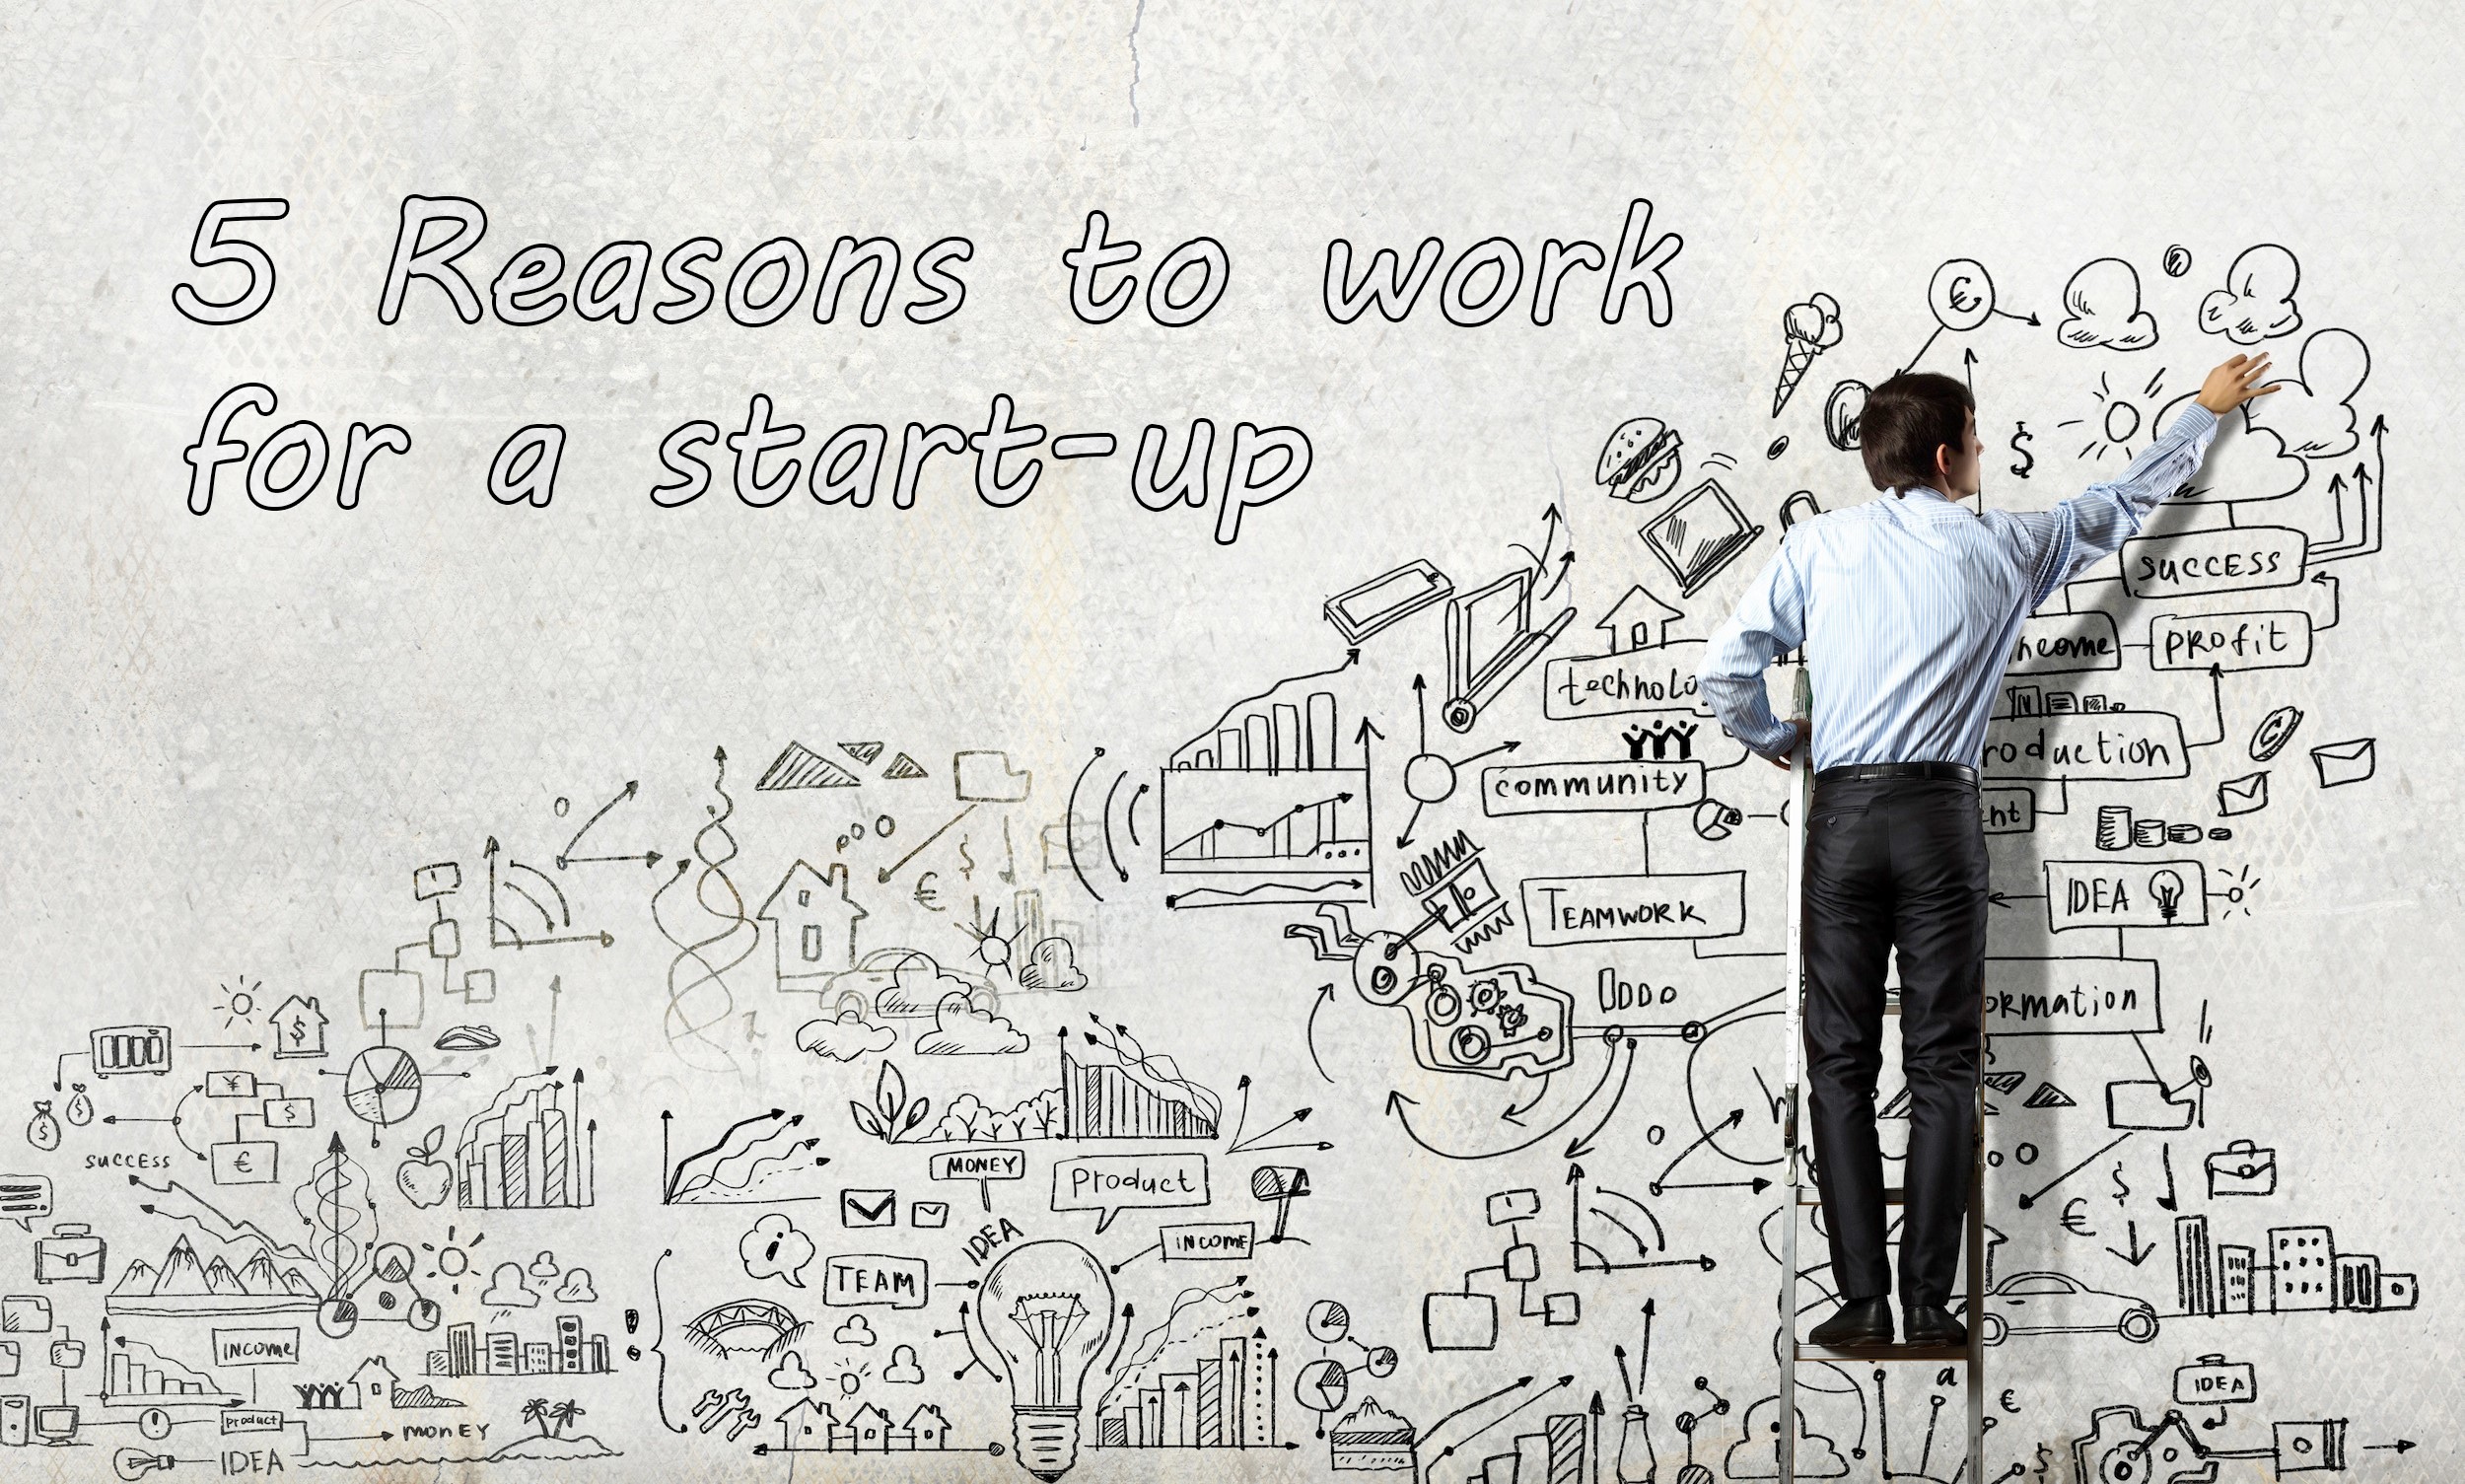 5 Reasons to work for a startup